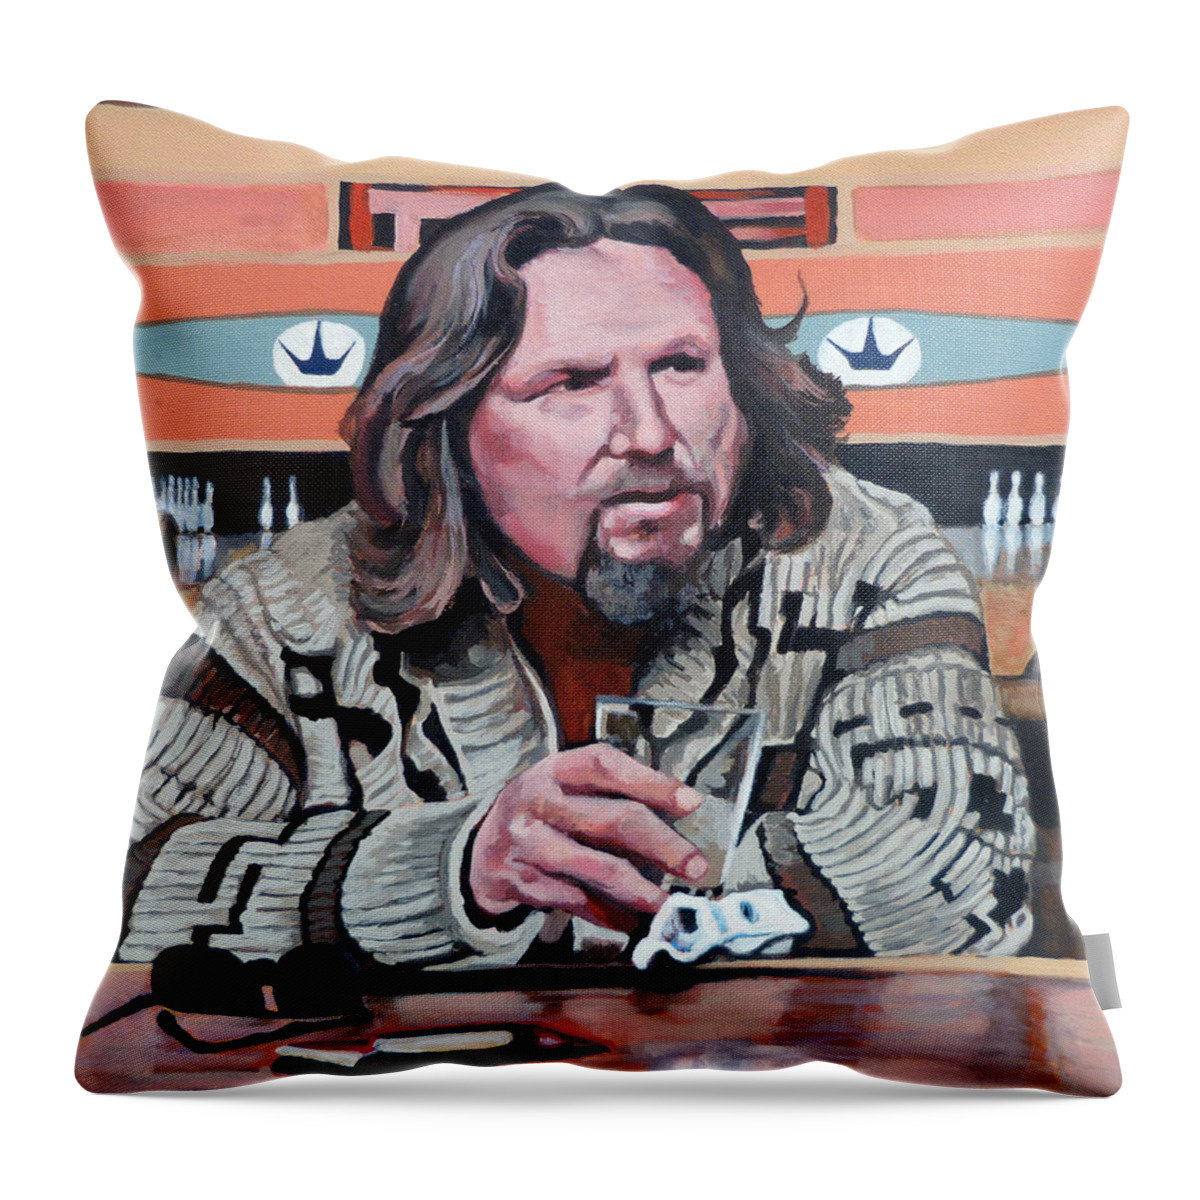 Dude Throw Pillow featuring the painting The Dude by Tom Roderick